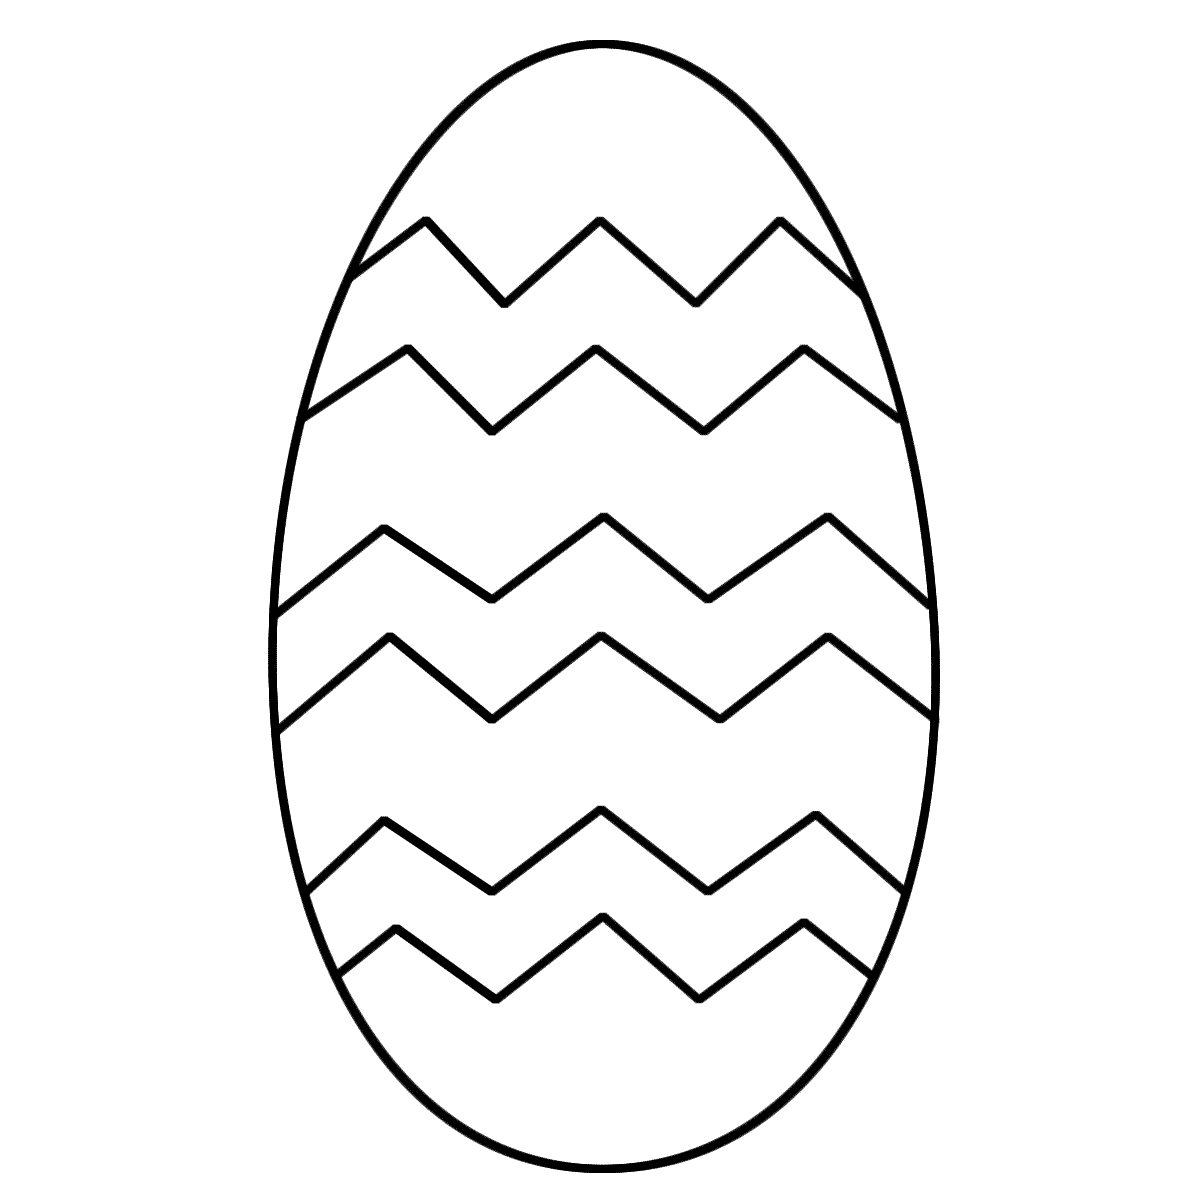 Easter Egg Template To Print - ClipArt Best